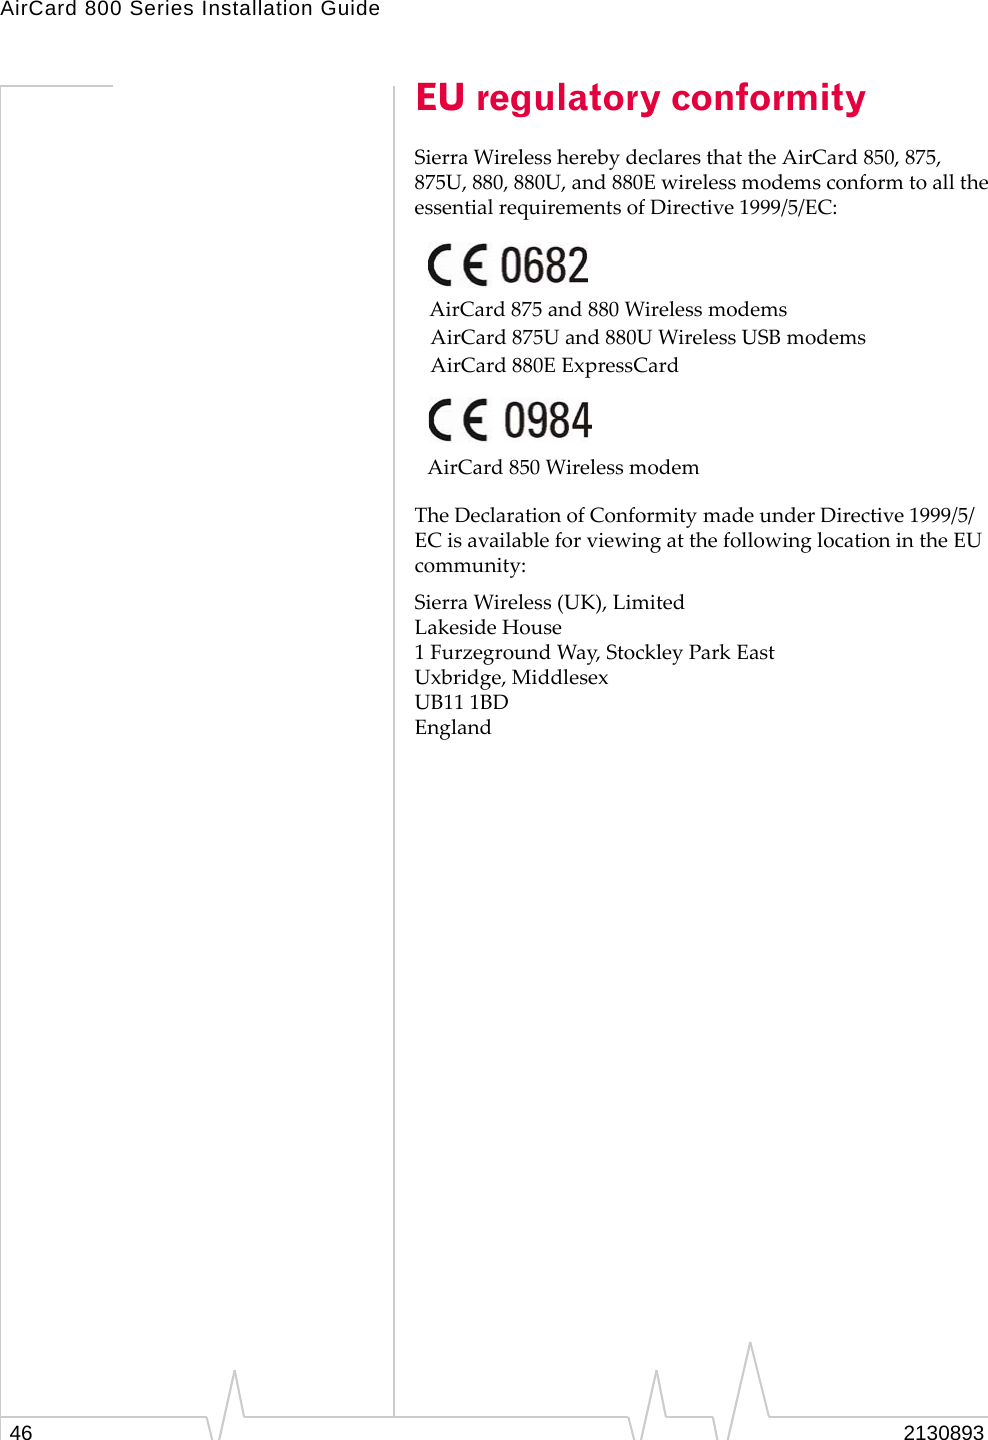 AirCard 800 Series Installation Guide EU regulatory conformity Sierra Wireless hereby declares that the AirCard 850, 875, 875U, 880, 880U, and 880E wireless modems conform to all the essential requirements of Directive 1999/5/EC: AirCard 875 and 880 Wireless modems AirCard 875U and 880U Wireless USB modems AirCard 880E ExpressCard AirCard 850 Wireless modem The Declaration of Conformity made under Directive 1999/5/ EC is available for viewing at the following location in the EU community: Sierra Wireless (UK), Limited Lakeside House 1 Furzeground Way, Stockley Park East Uxbridge, Middlesex UB11 1BD England 46  2130893 